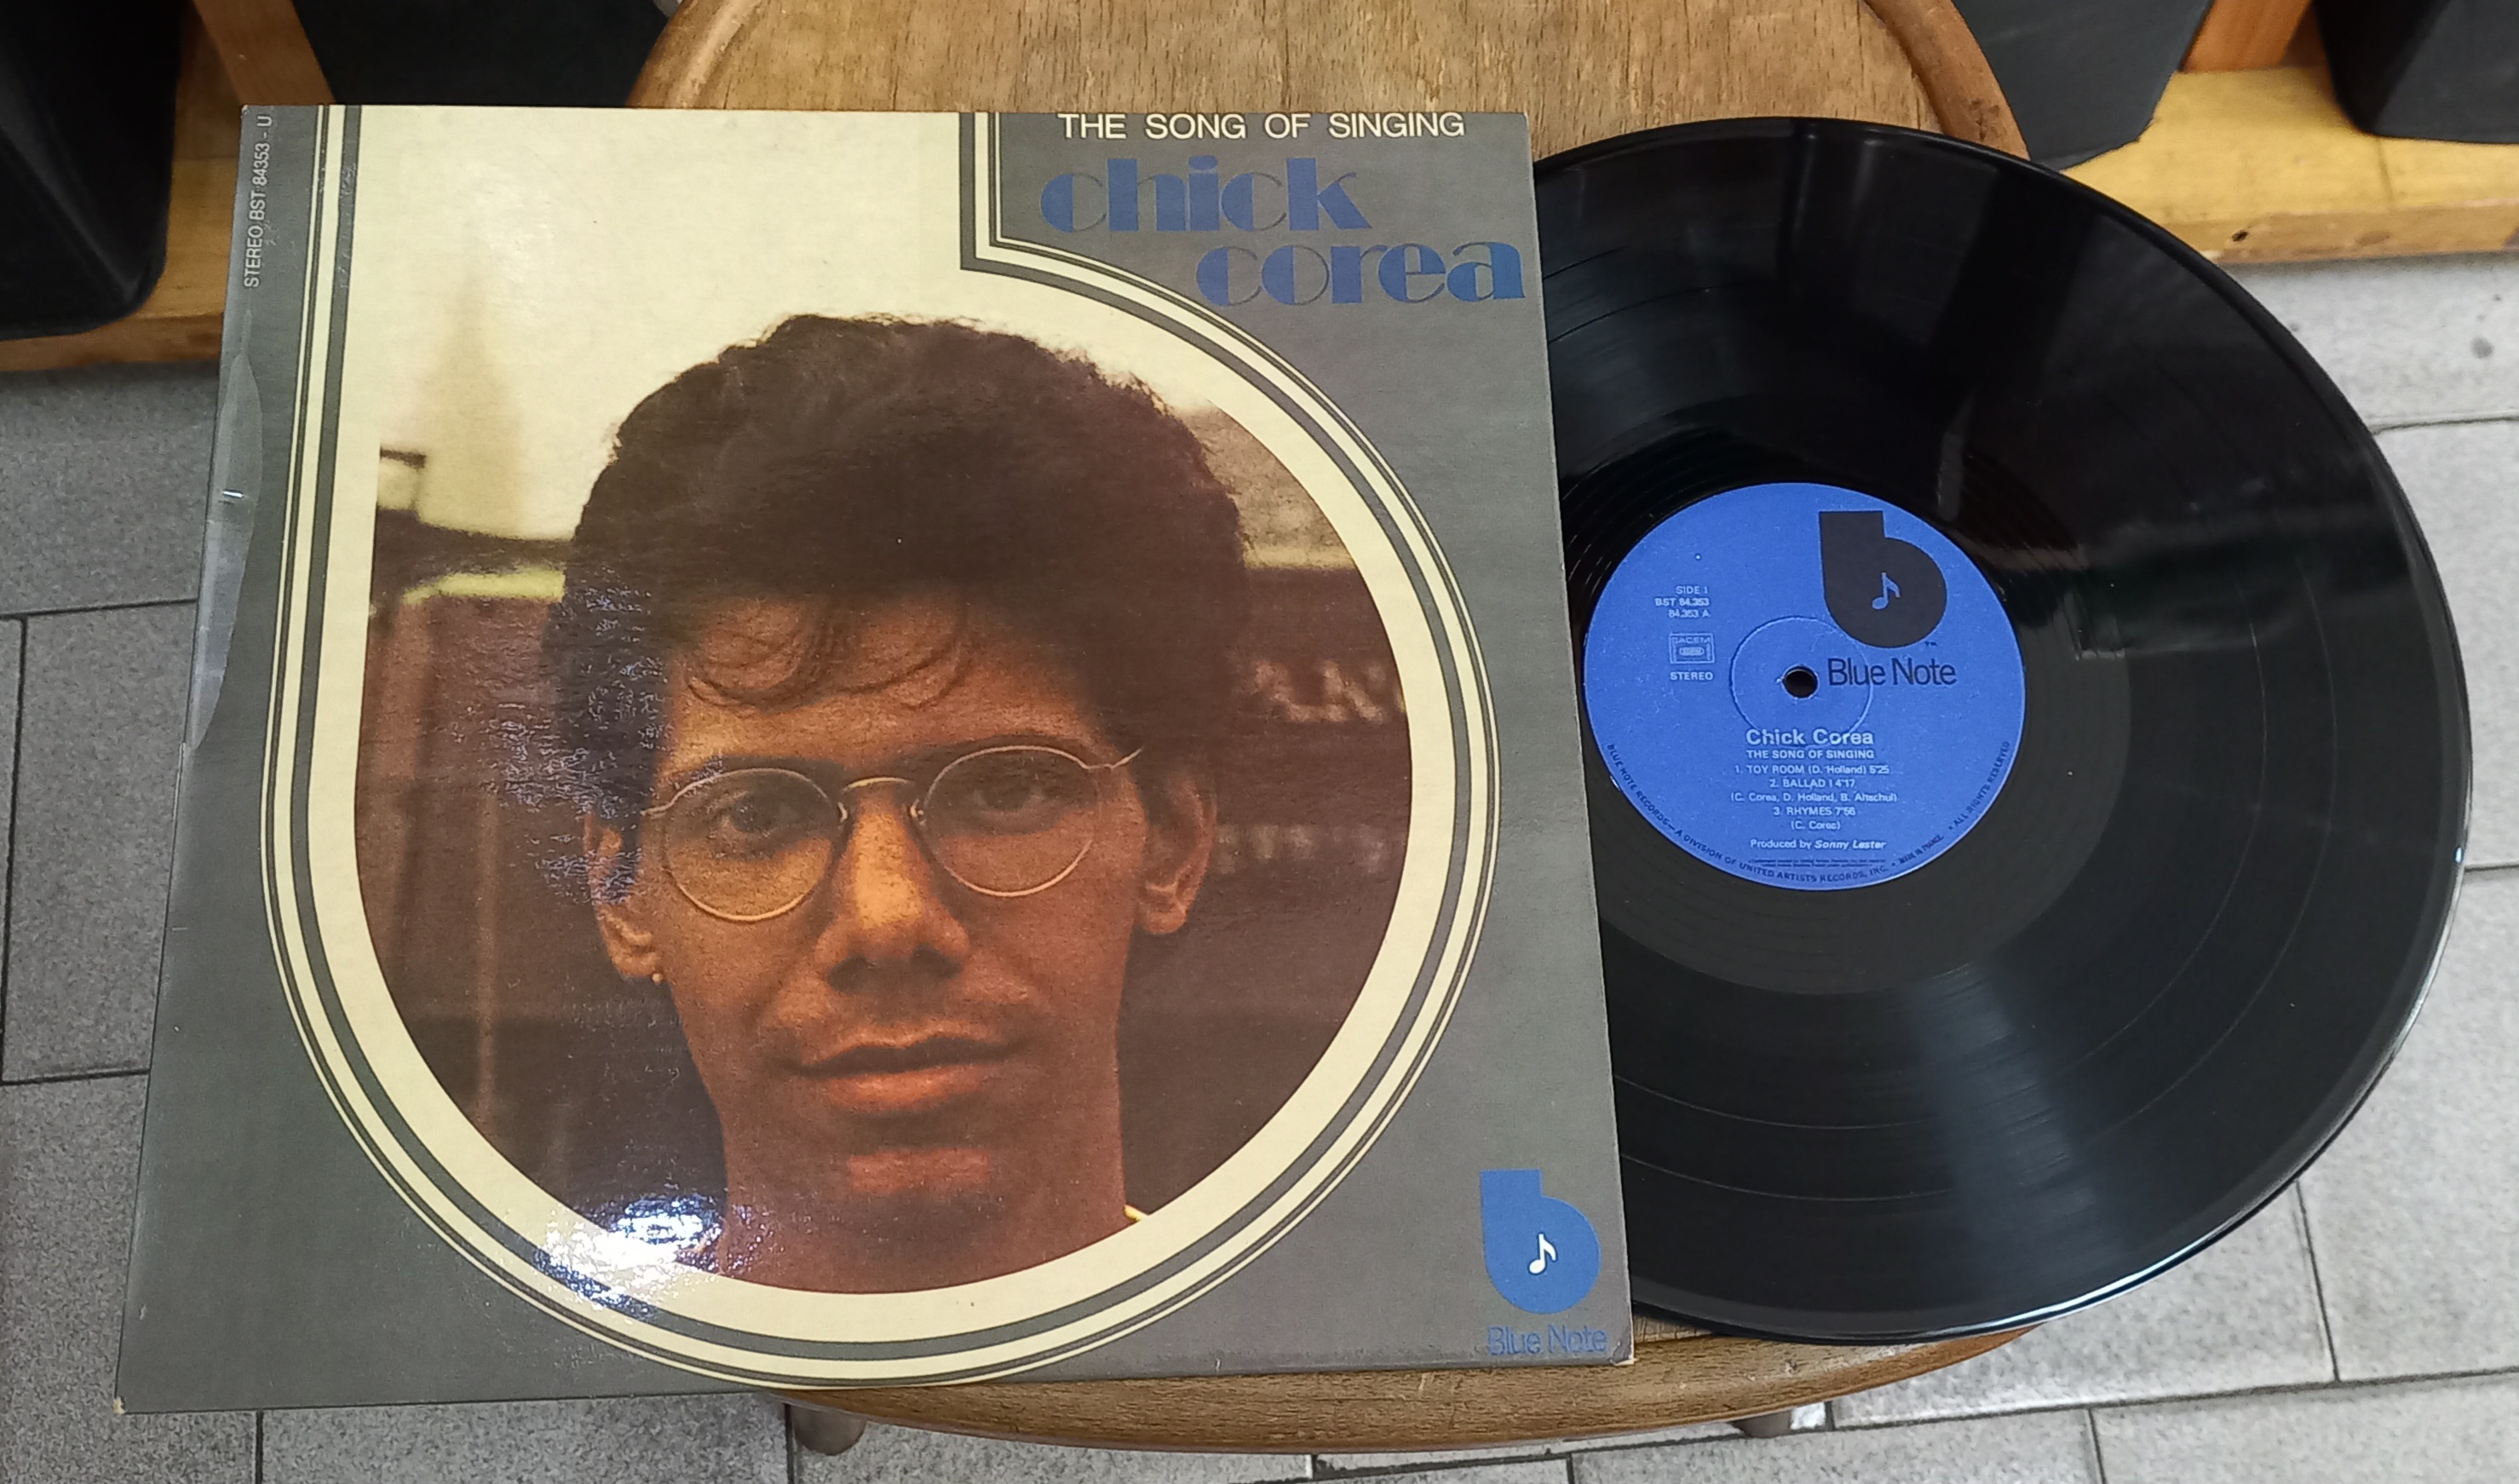 Chick Corea – The Song Of Singing